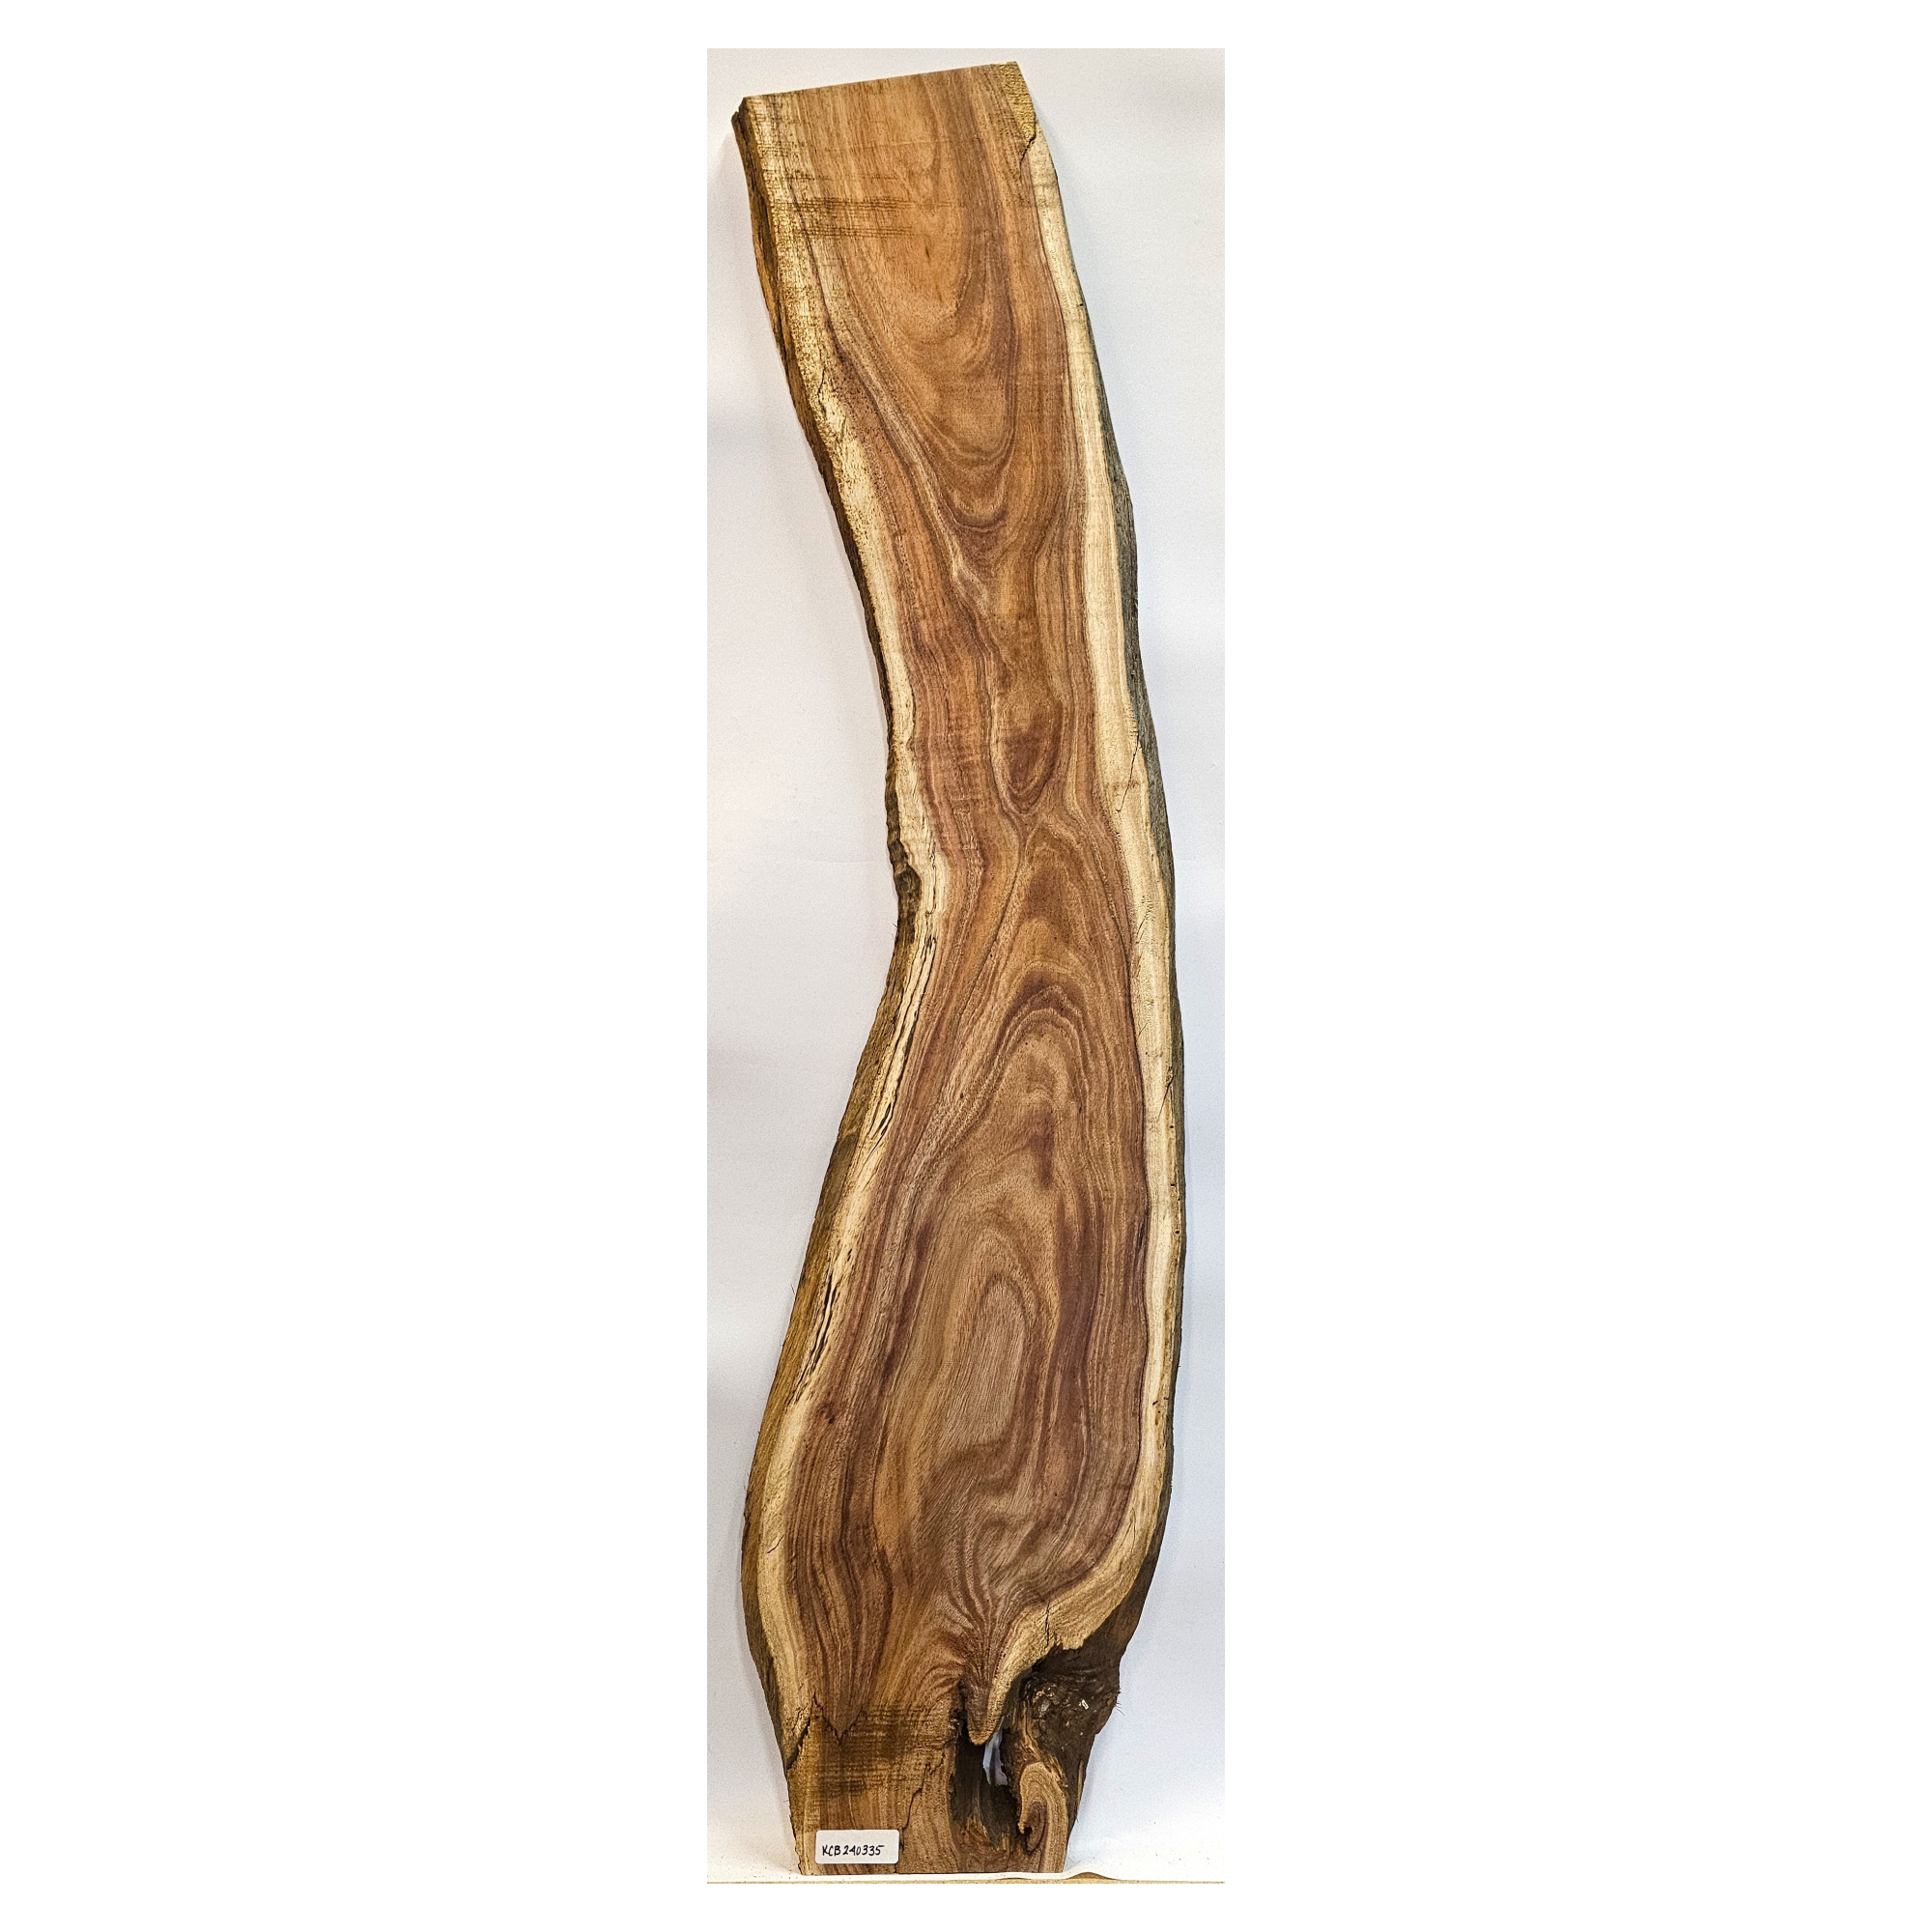 Beautiful lightly curly koa craft board with wonderful color and grain, light curl, and live edges.